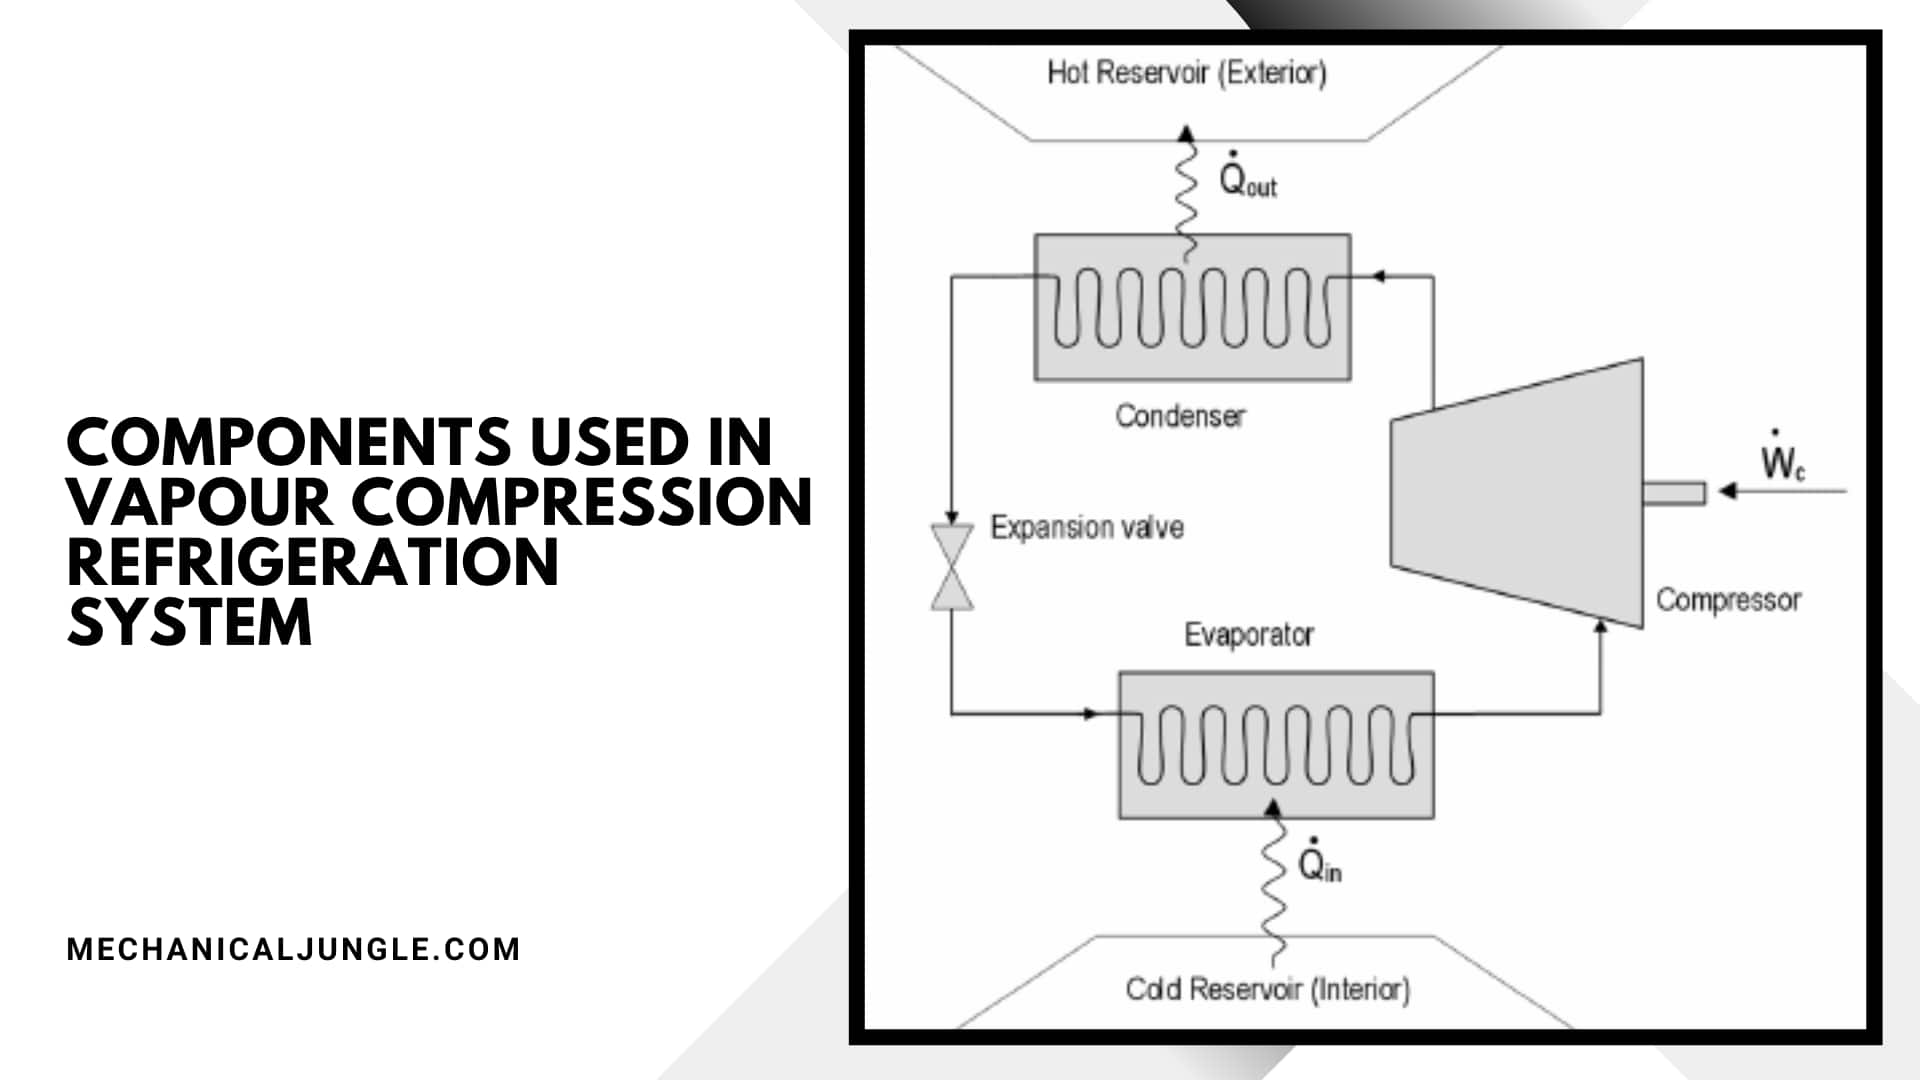 Components Used in Vapour Compression Refrigeration System